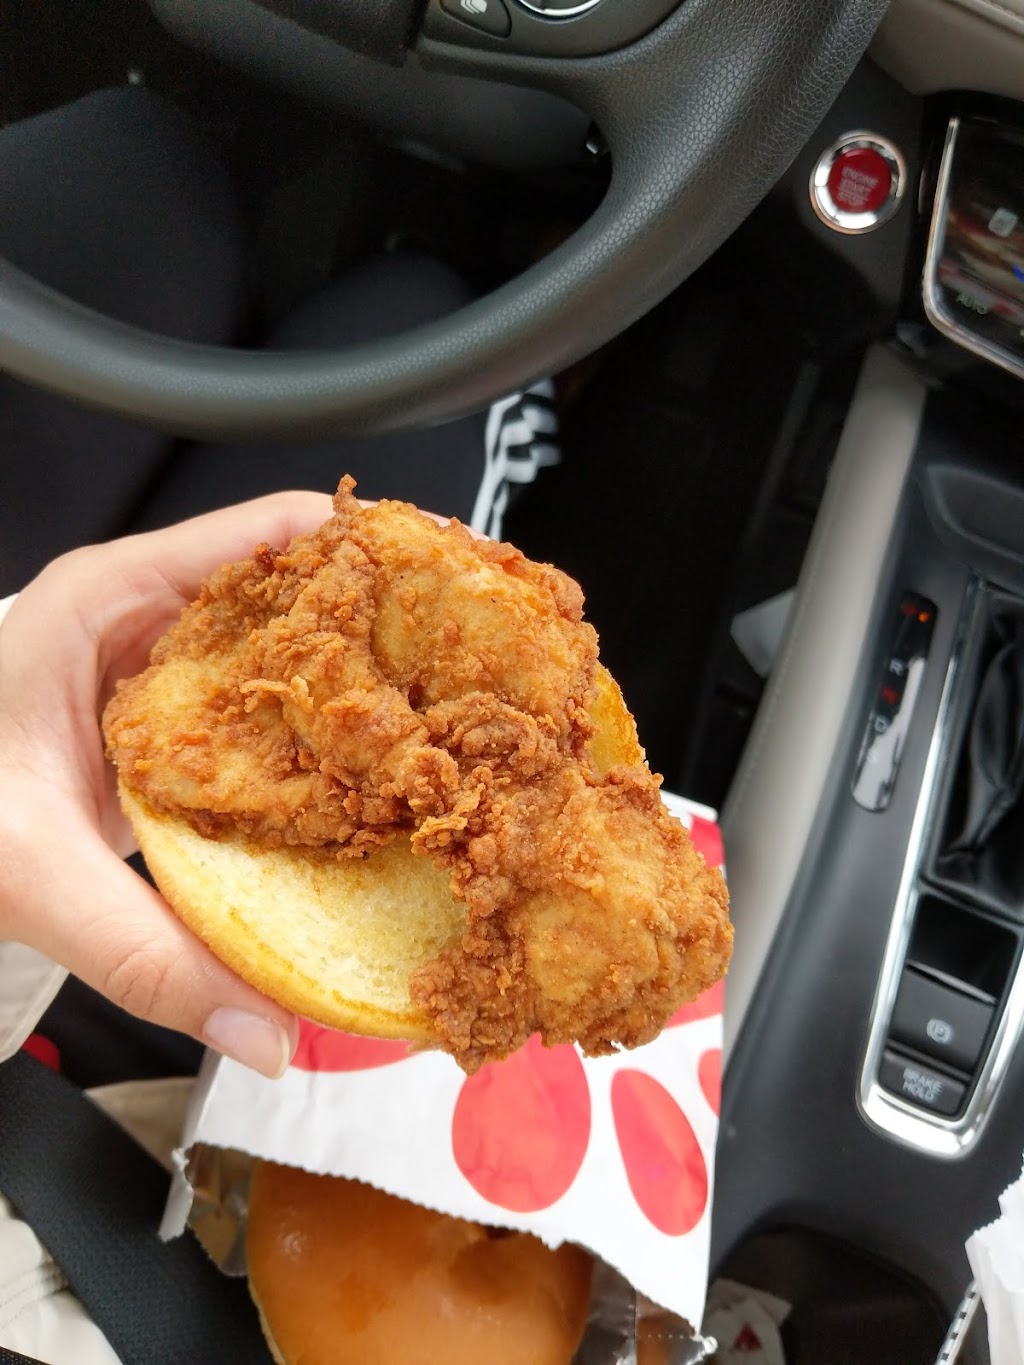 Chick-fil-A | 5043 Tuttle Crossing Blvd Suite 169, Dublin, OH 43016, USA | Phone: (614) 760-7688